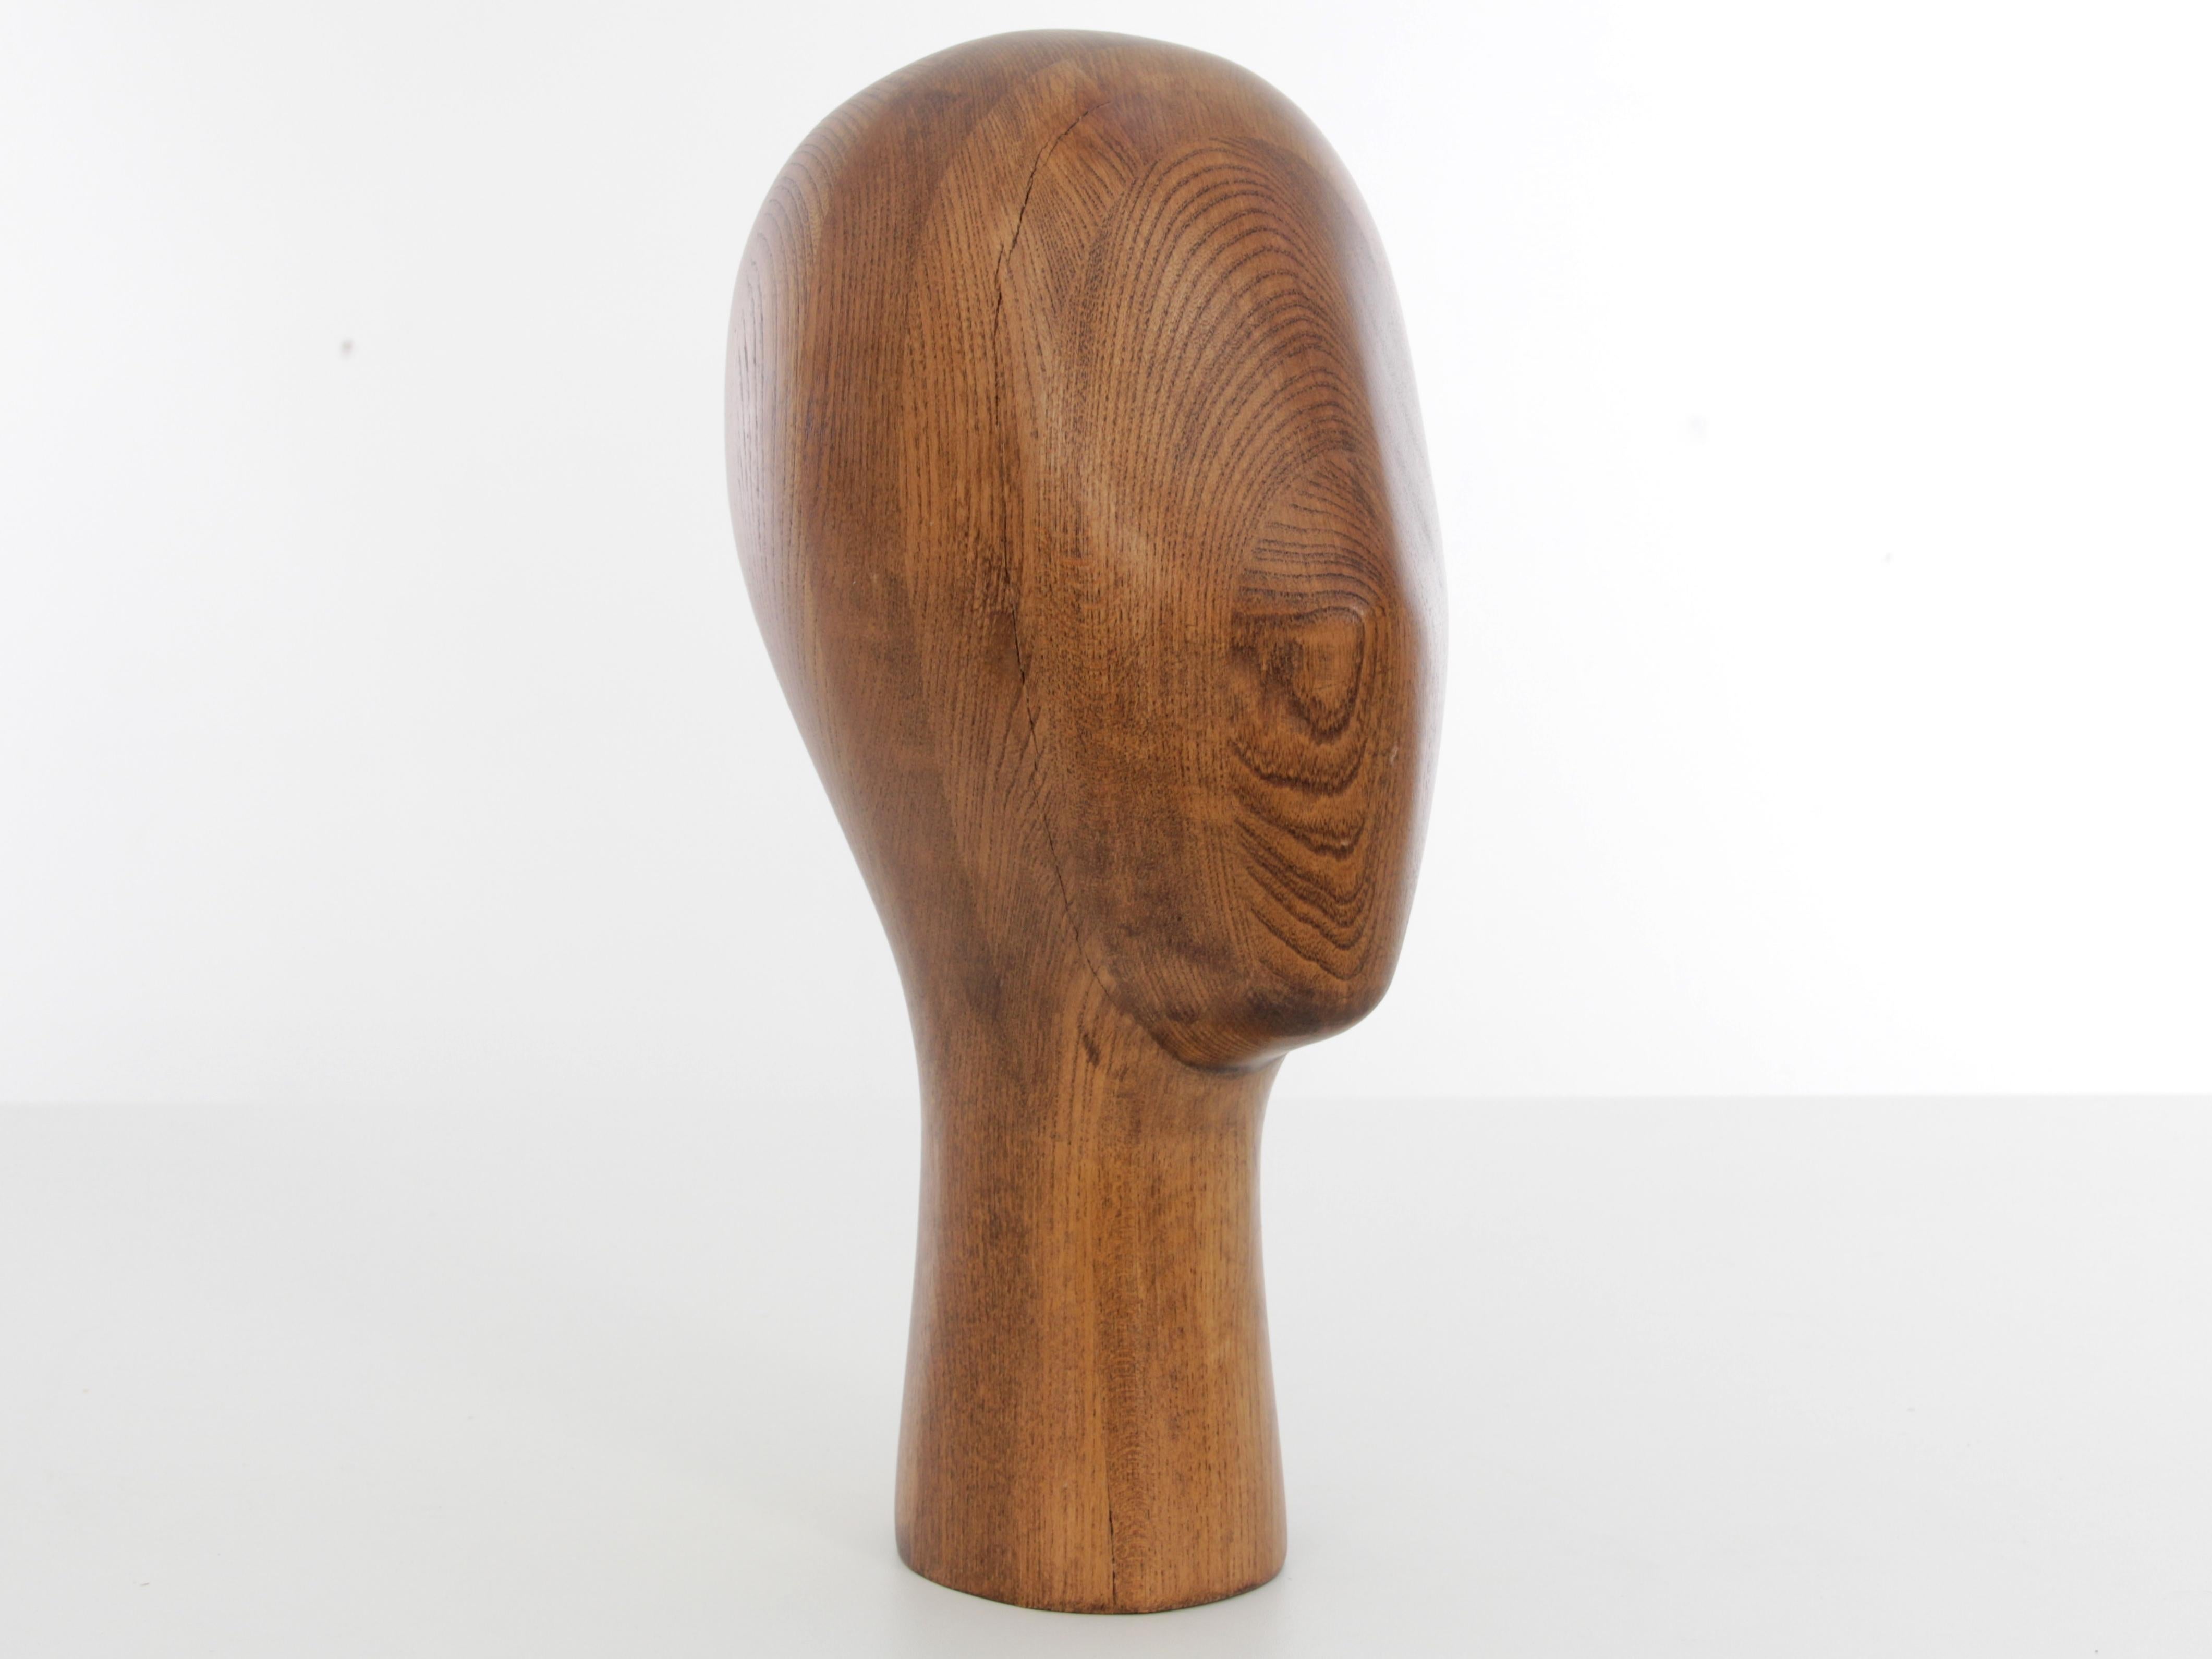 Vintage wood mannequin head from sweeden. Solid oak, circa 1960. Price for the pair.